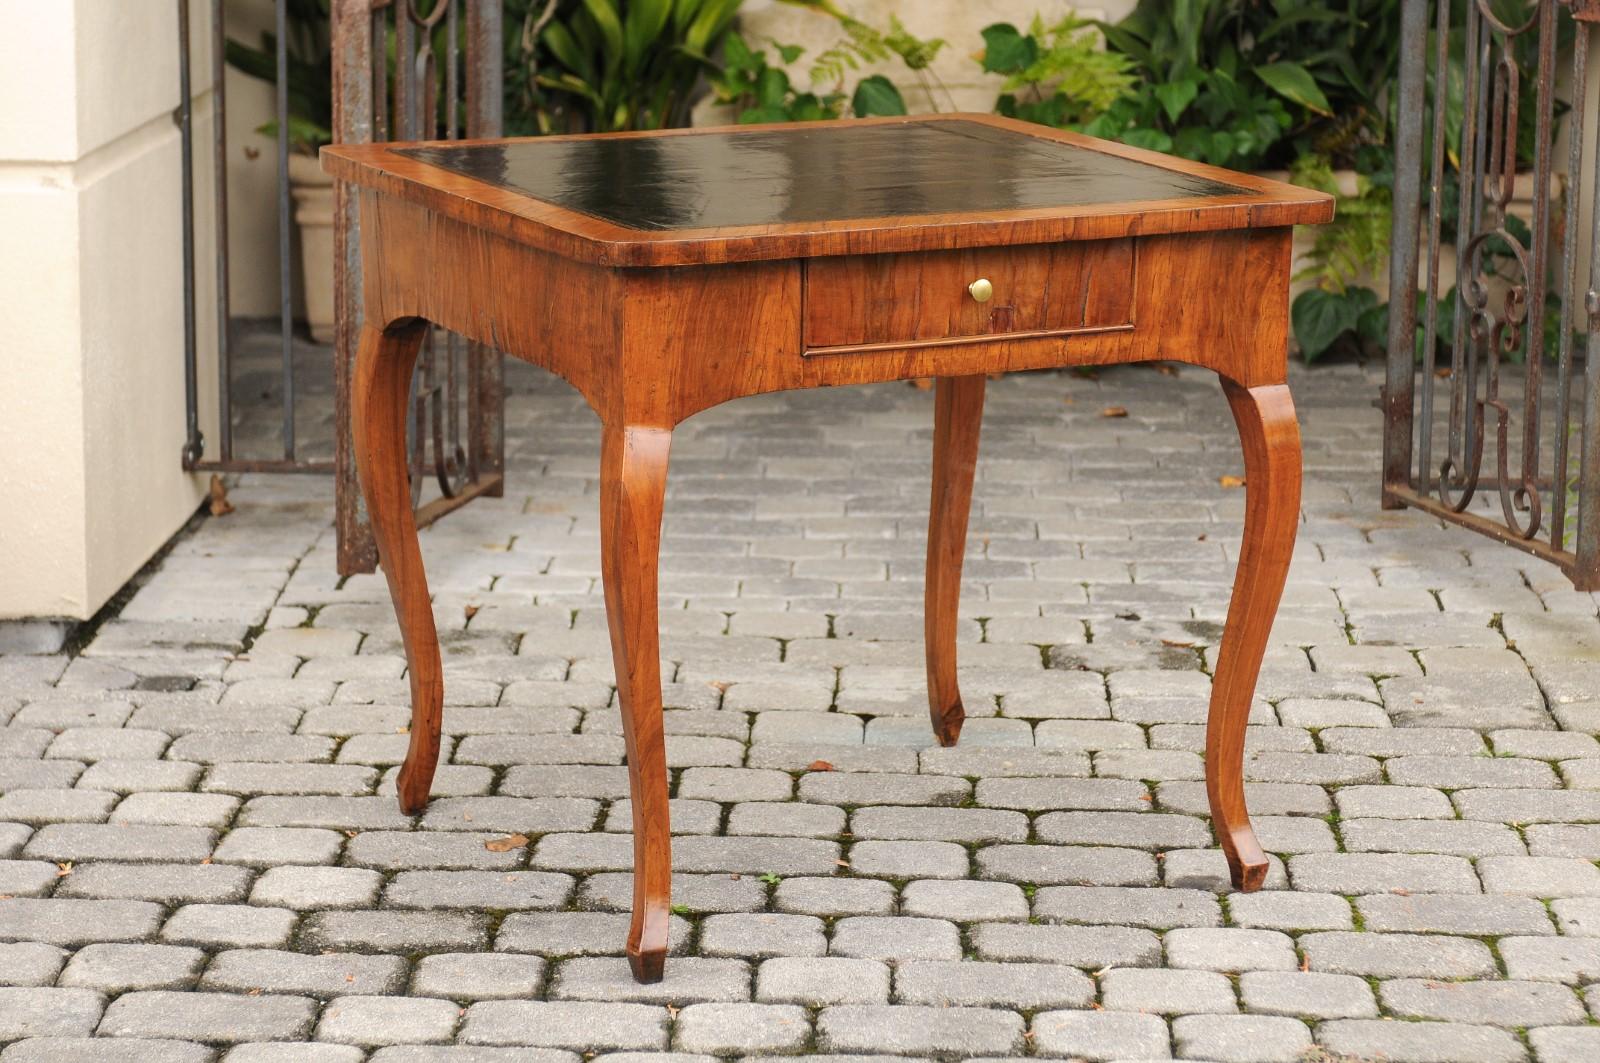 An Italian walnut veneered game table from the late 18th century with leather top inset, single drawer and cabriole legs. Born in the later years of the 18th century, this Italian game table features an exquisite walnut-veneered body, topped with an